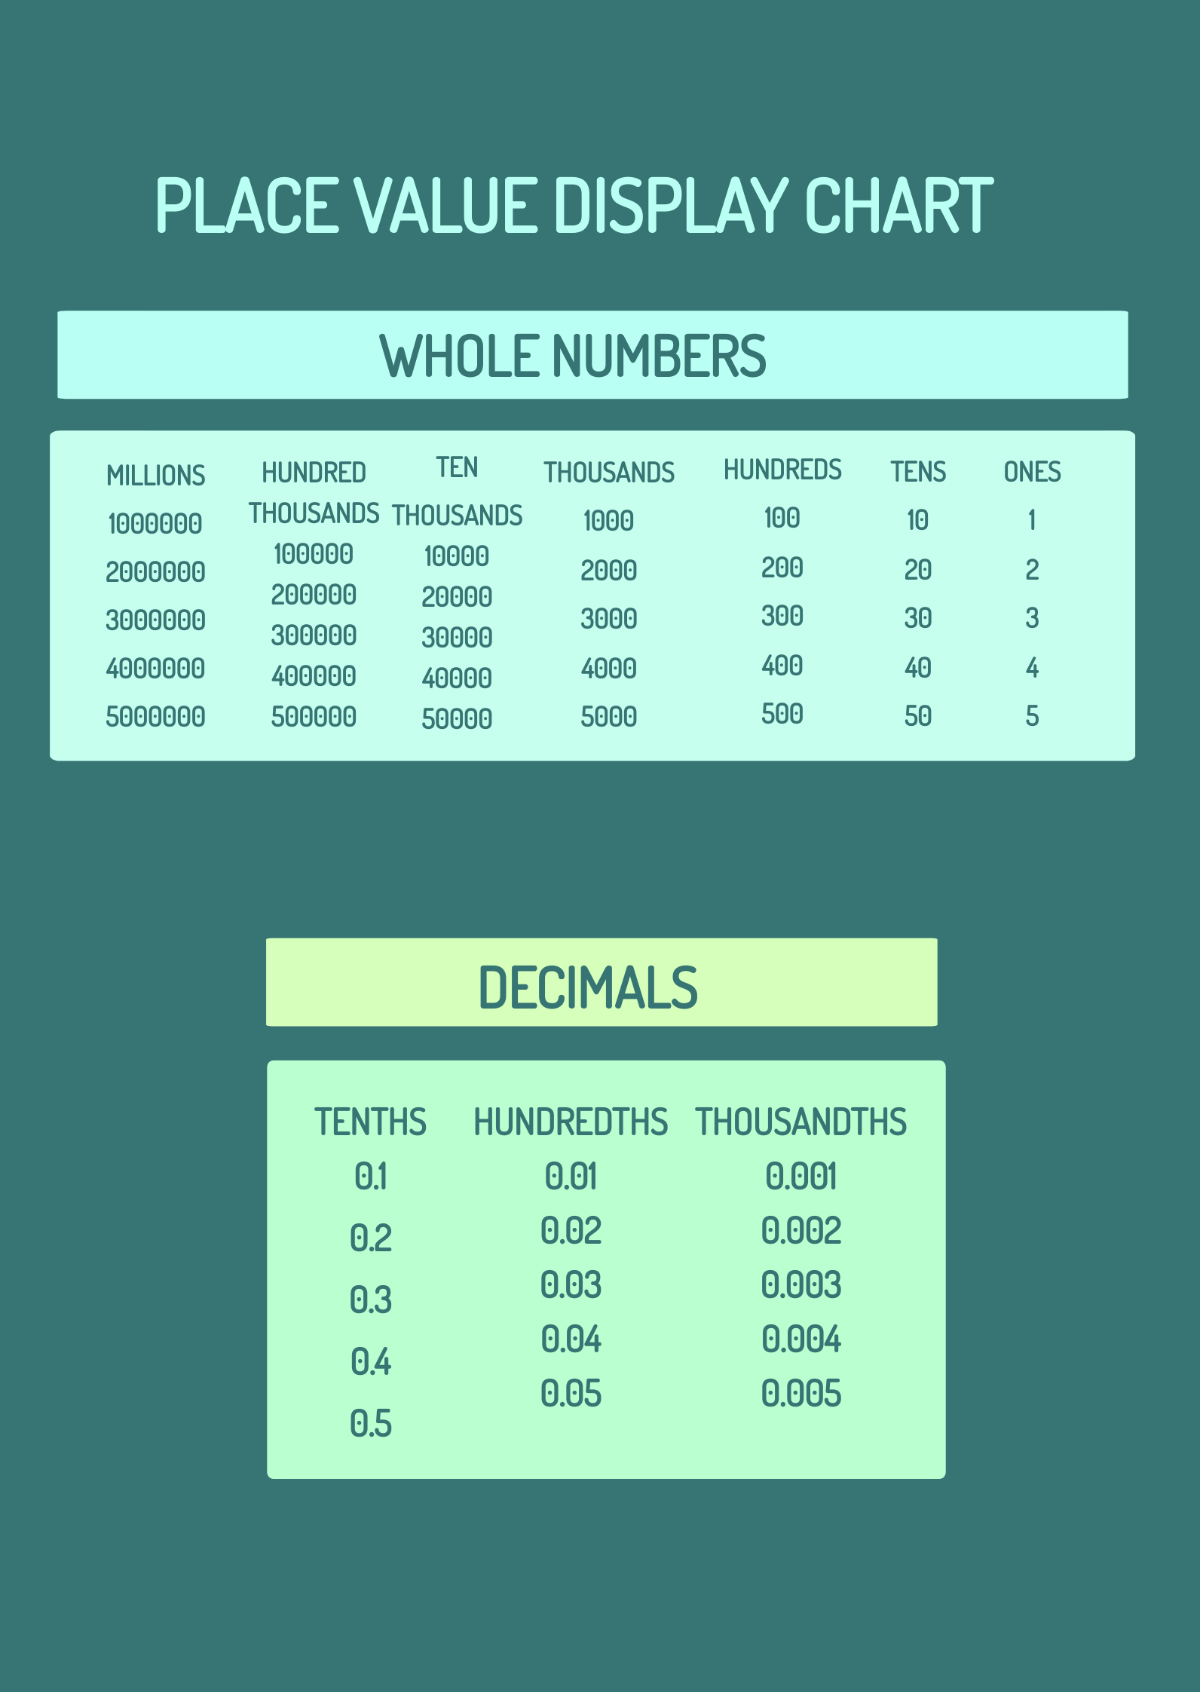 Place Value Display Chart Template